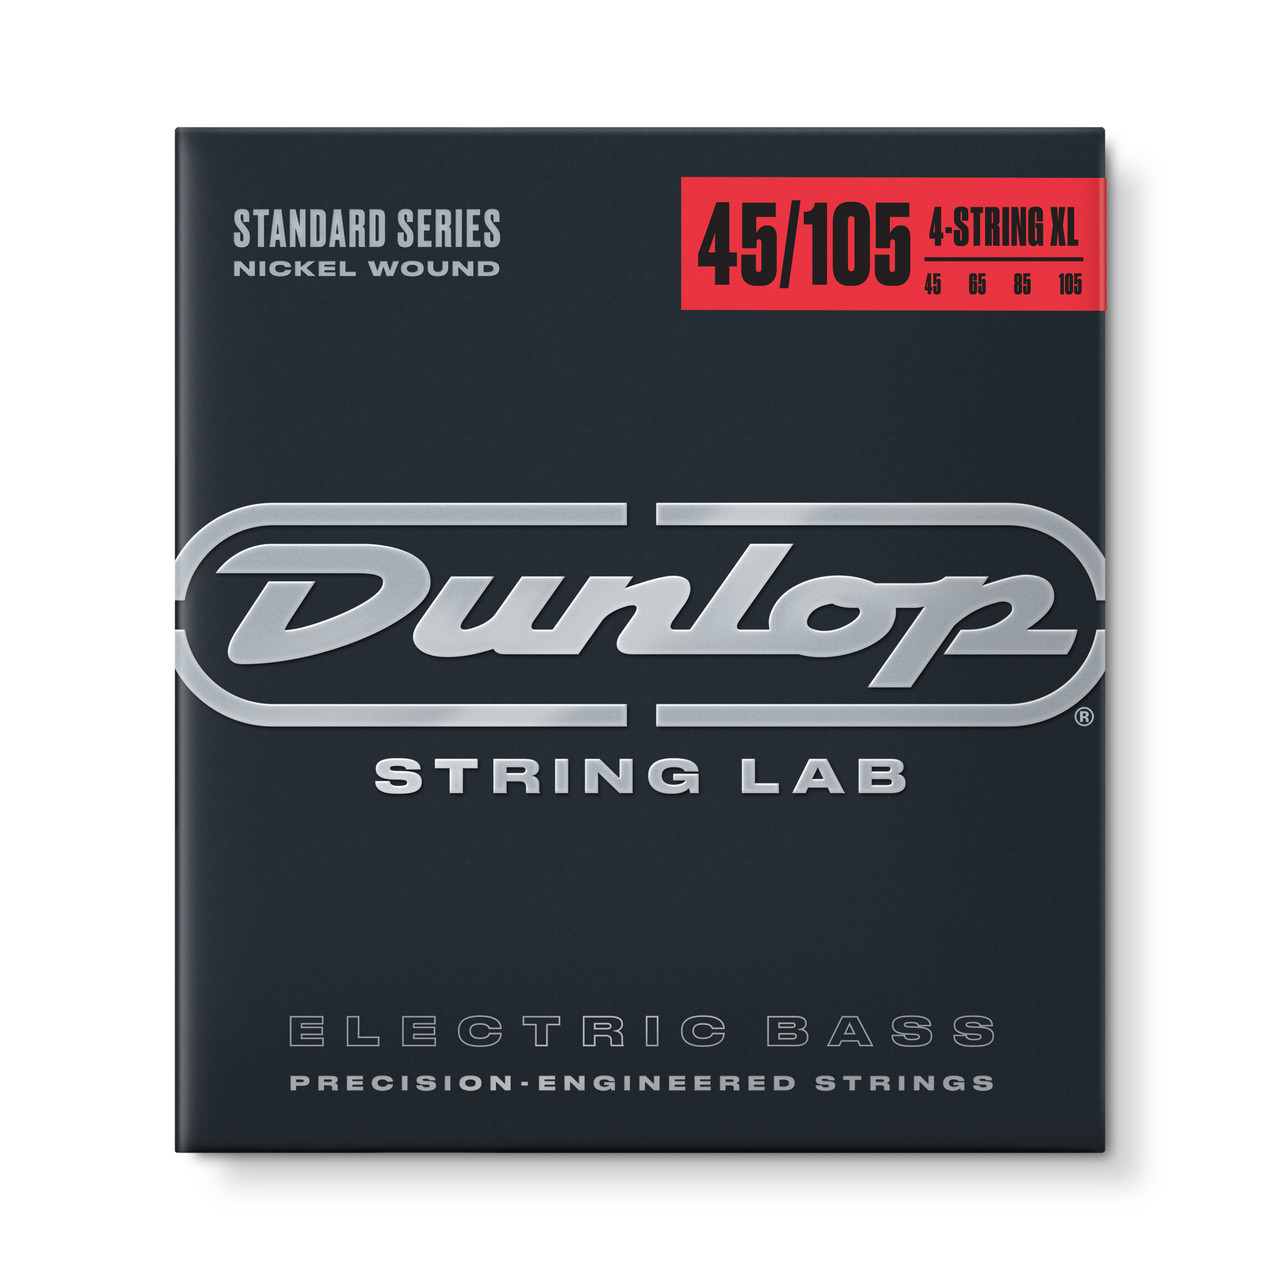 STANDARD SERIES NICKEL WOUND EXTRA LONG SCALE BASS STRINGS 45-105